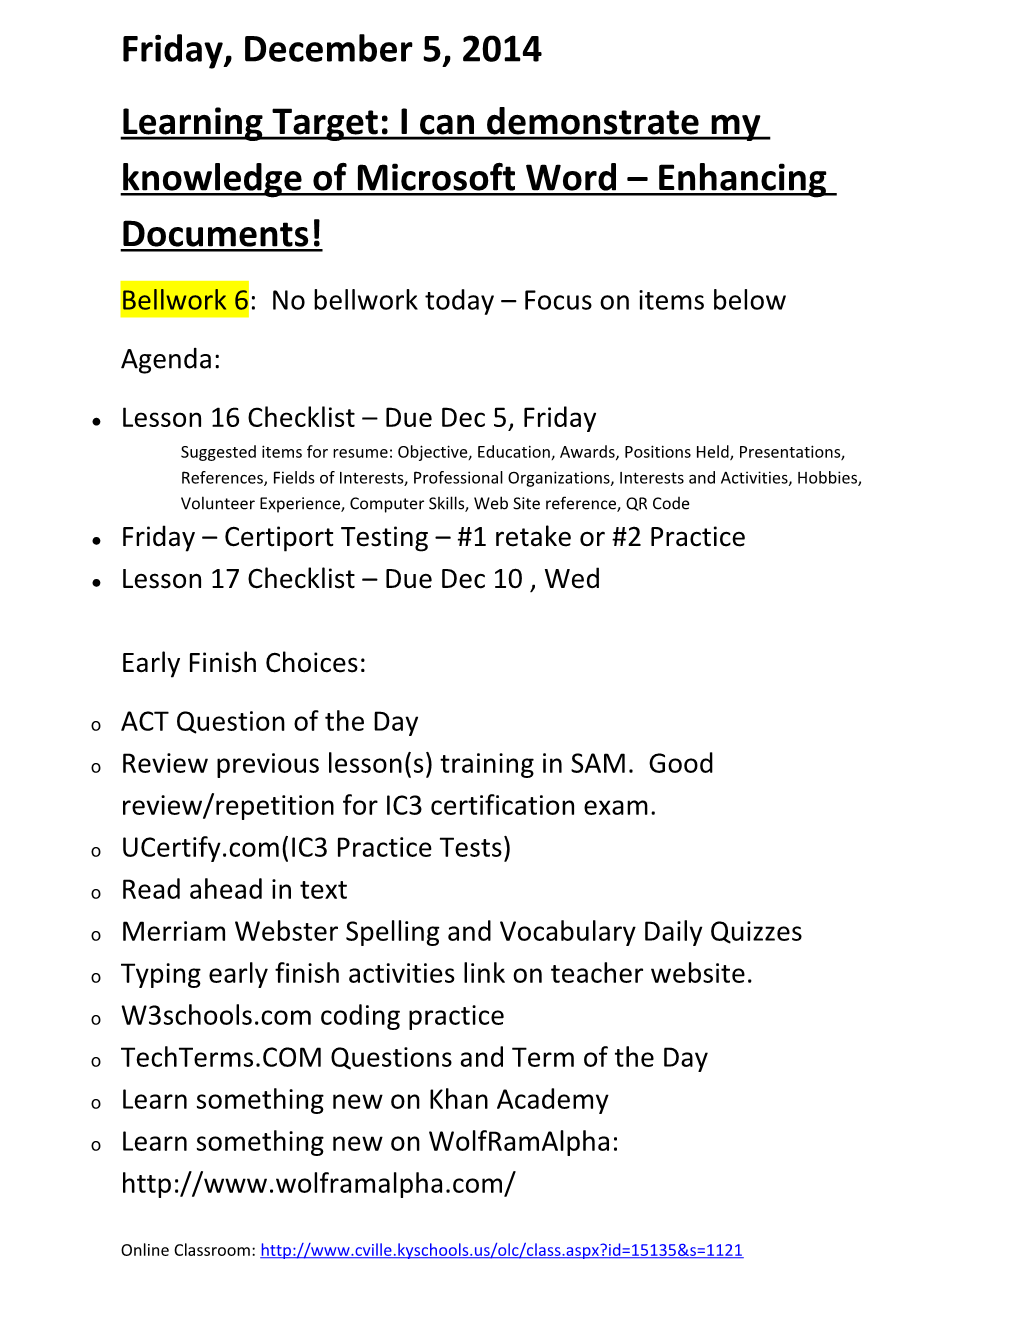 Learning Target: I Can Demonstrate My Knowledge of Microsoft Word Enhancing Documents!